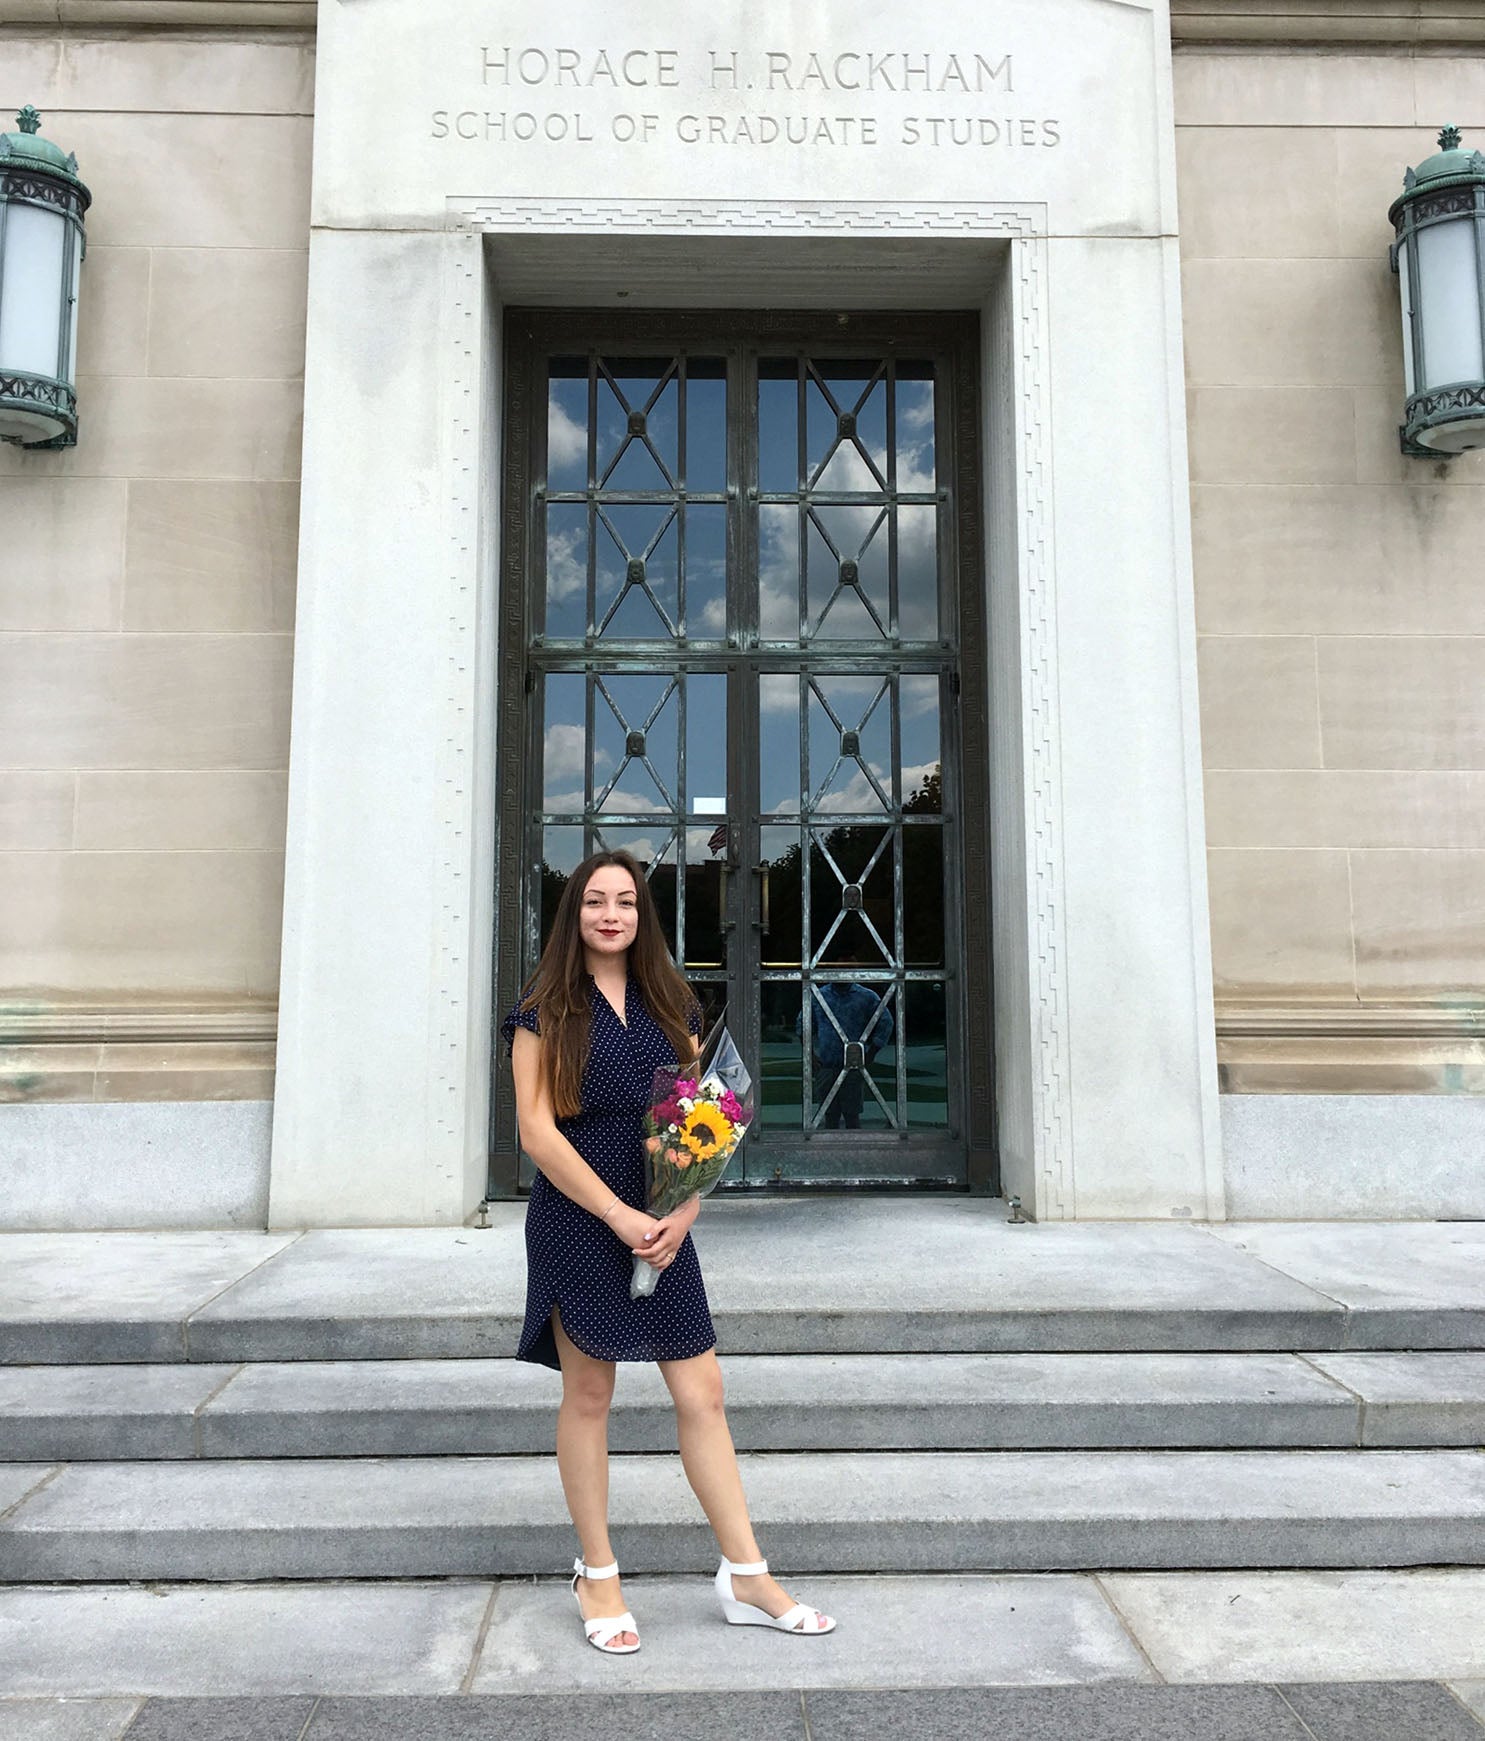 Jacqueline poses with flowers outside the Horace H. Rackham School of Graduate Studies